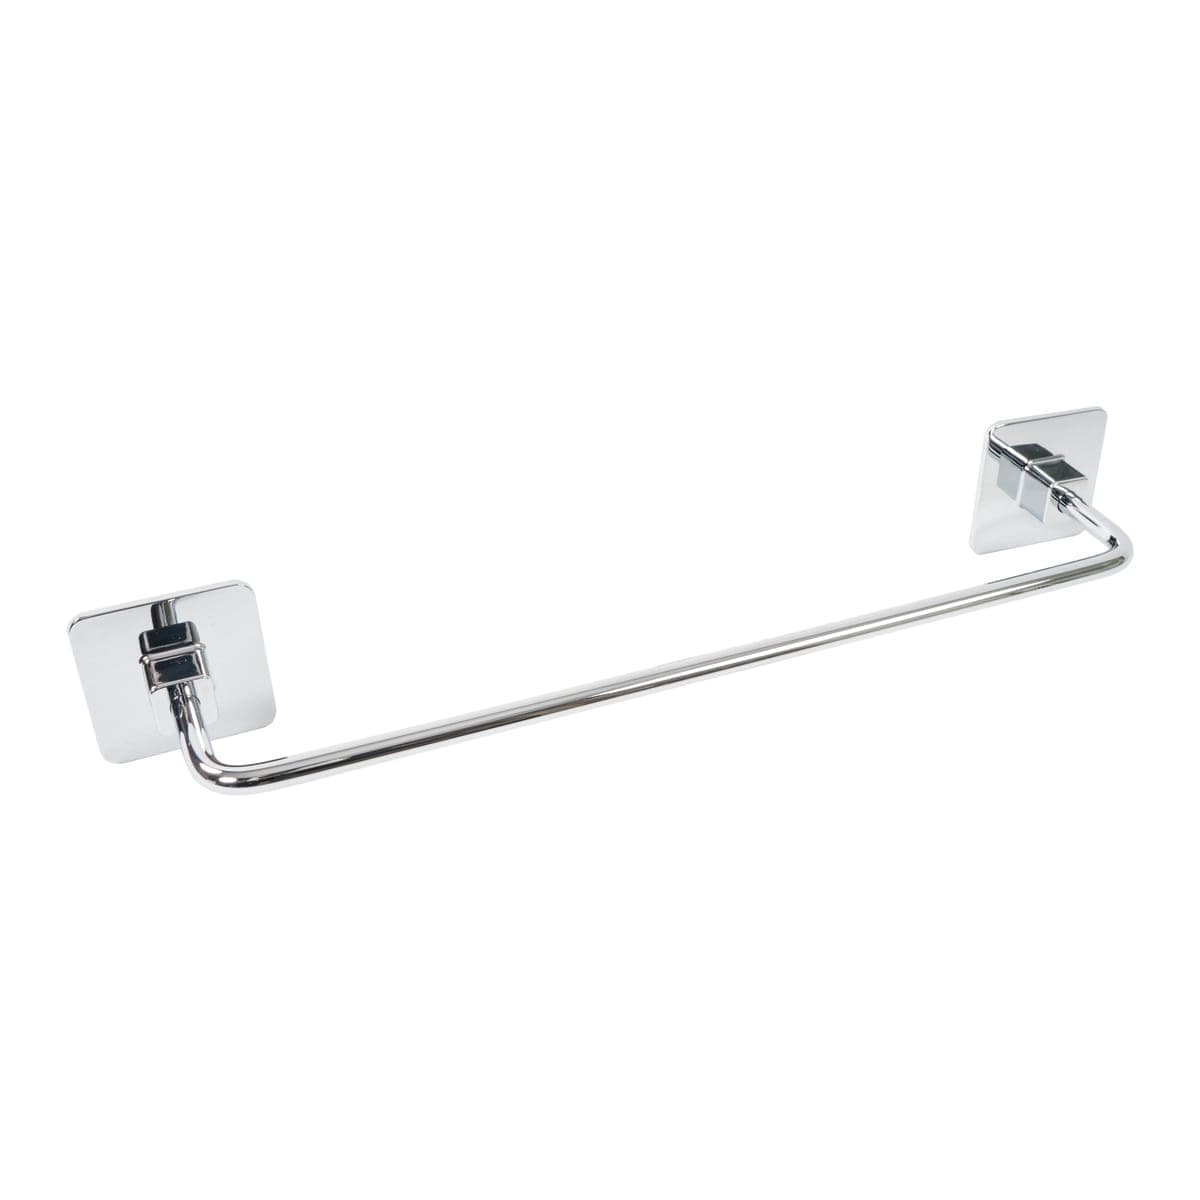 CHROME-PLATED TOWEL HOLDER CM30 COLD WIND